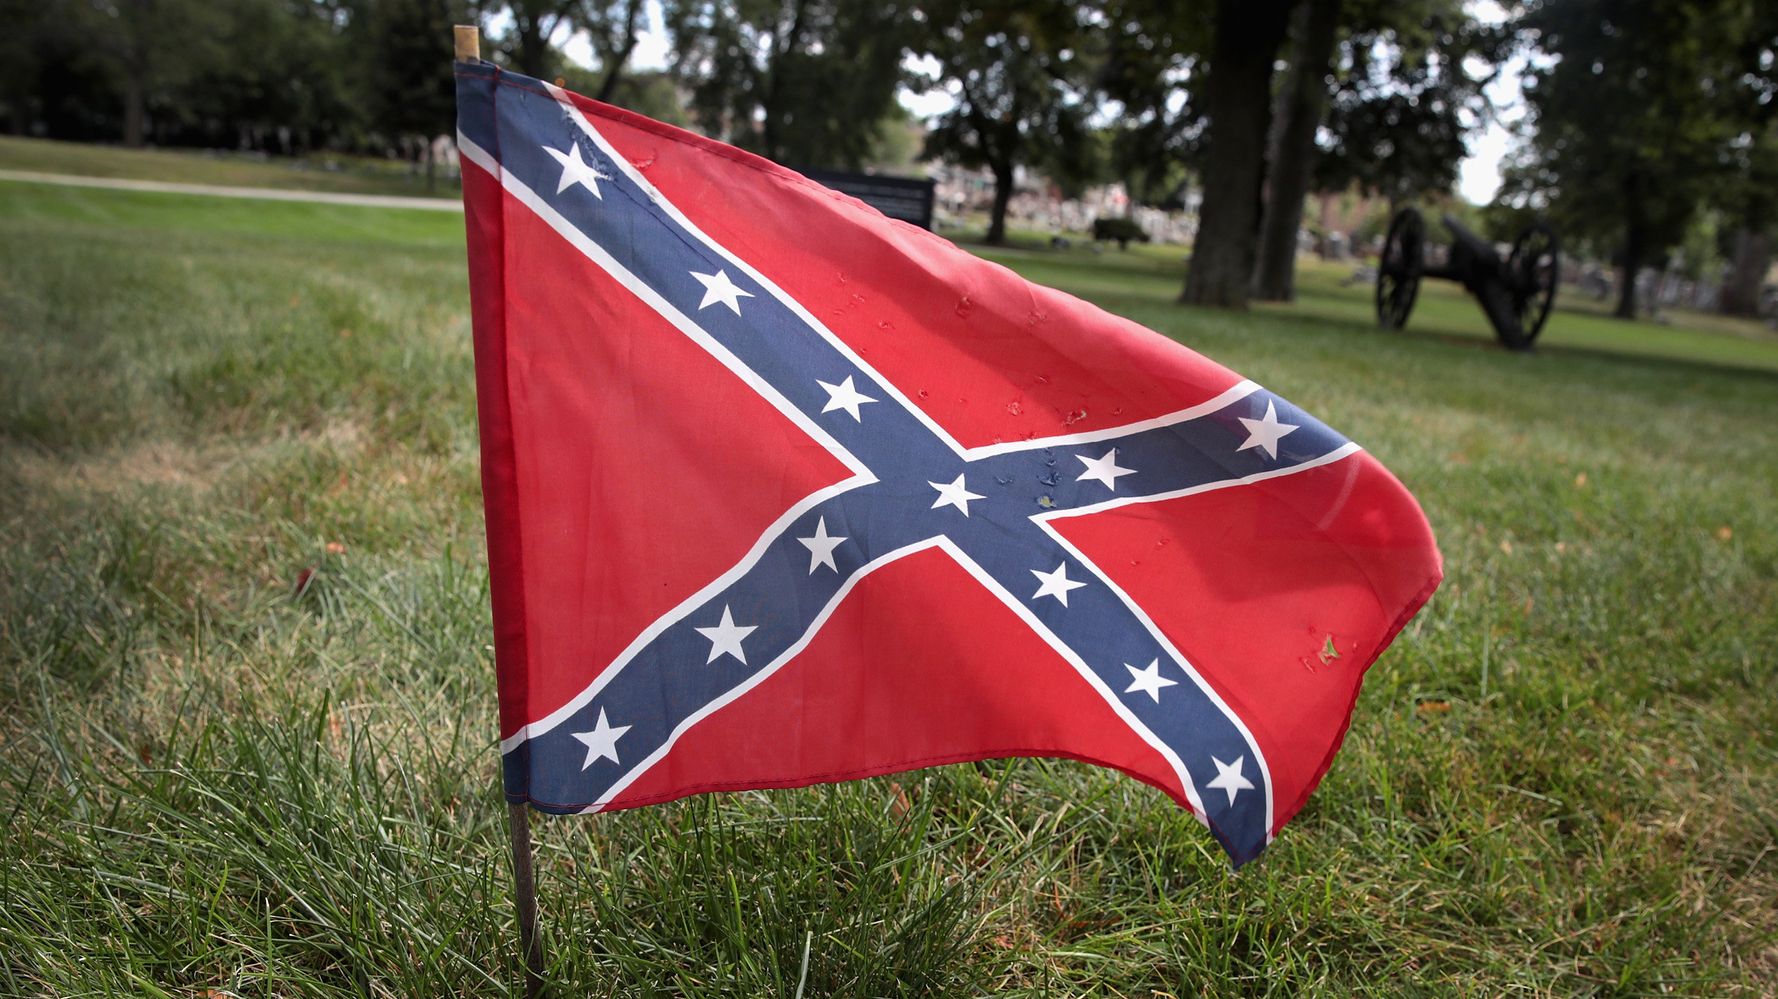 This Student Mocked The Confederate Flag And Received Death Threats For It.